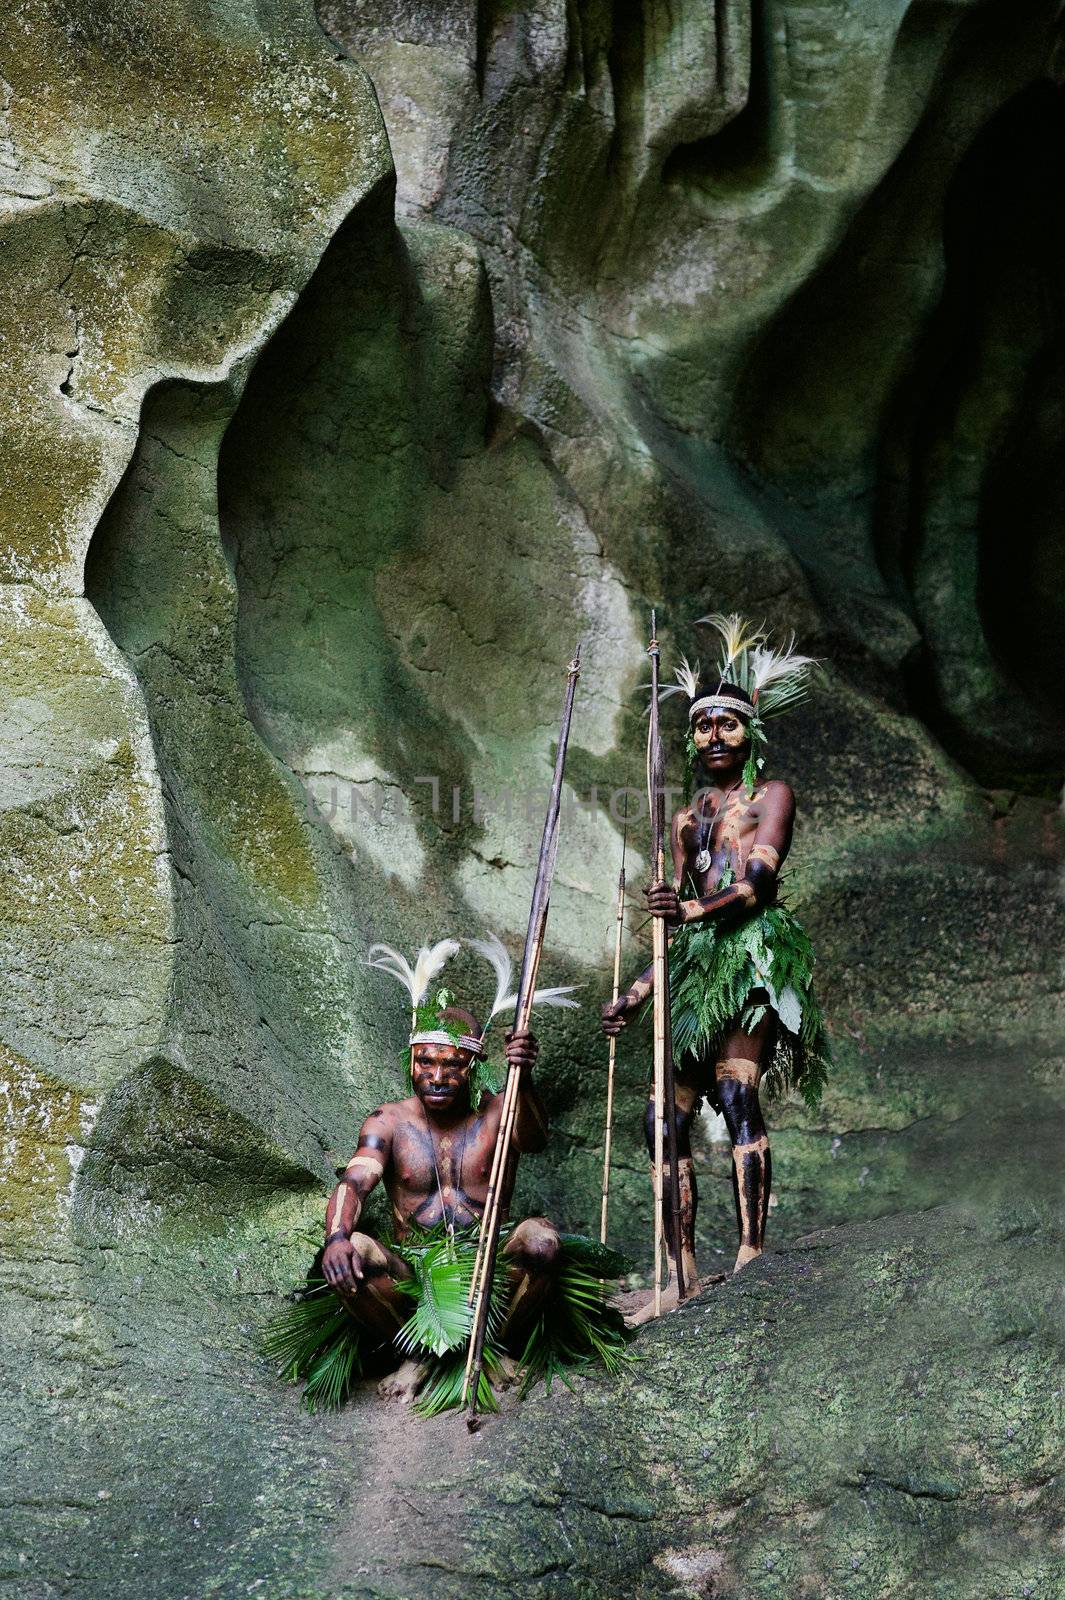 INDONESIA, NEW GUINEA, SECTOR SENGGI - 2 FEBRUARY 2009: The warriors of a Papuan tribe of Yafi in traditional clothes, ornaments and coloring. New Guinea Island, Indonesia. February 2, 2009. 